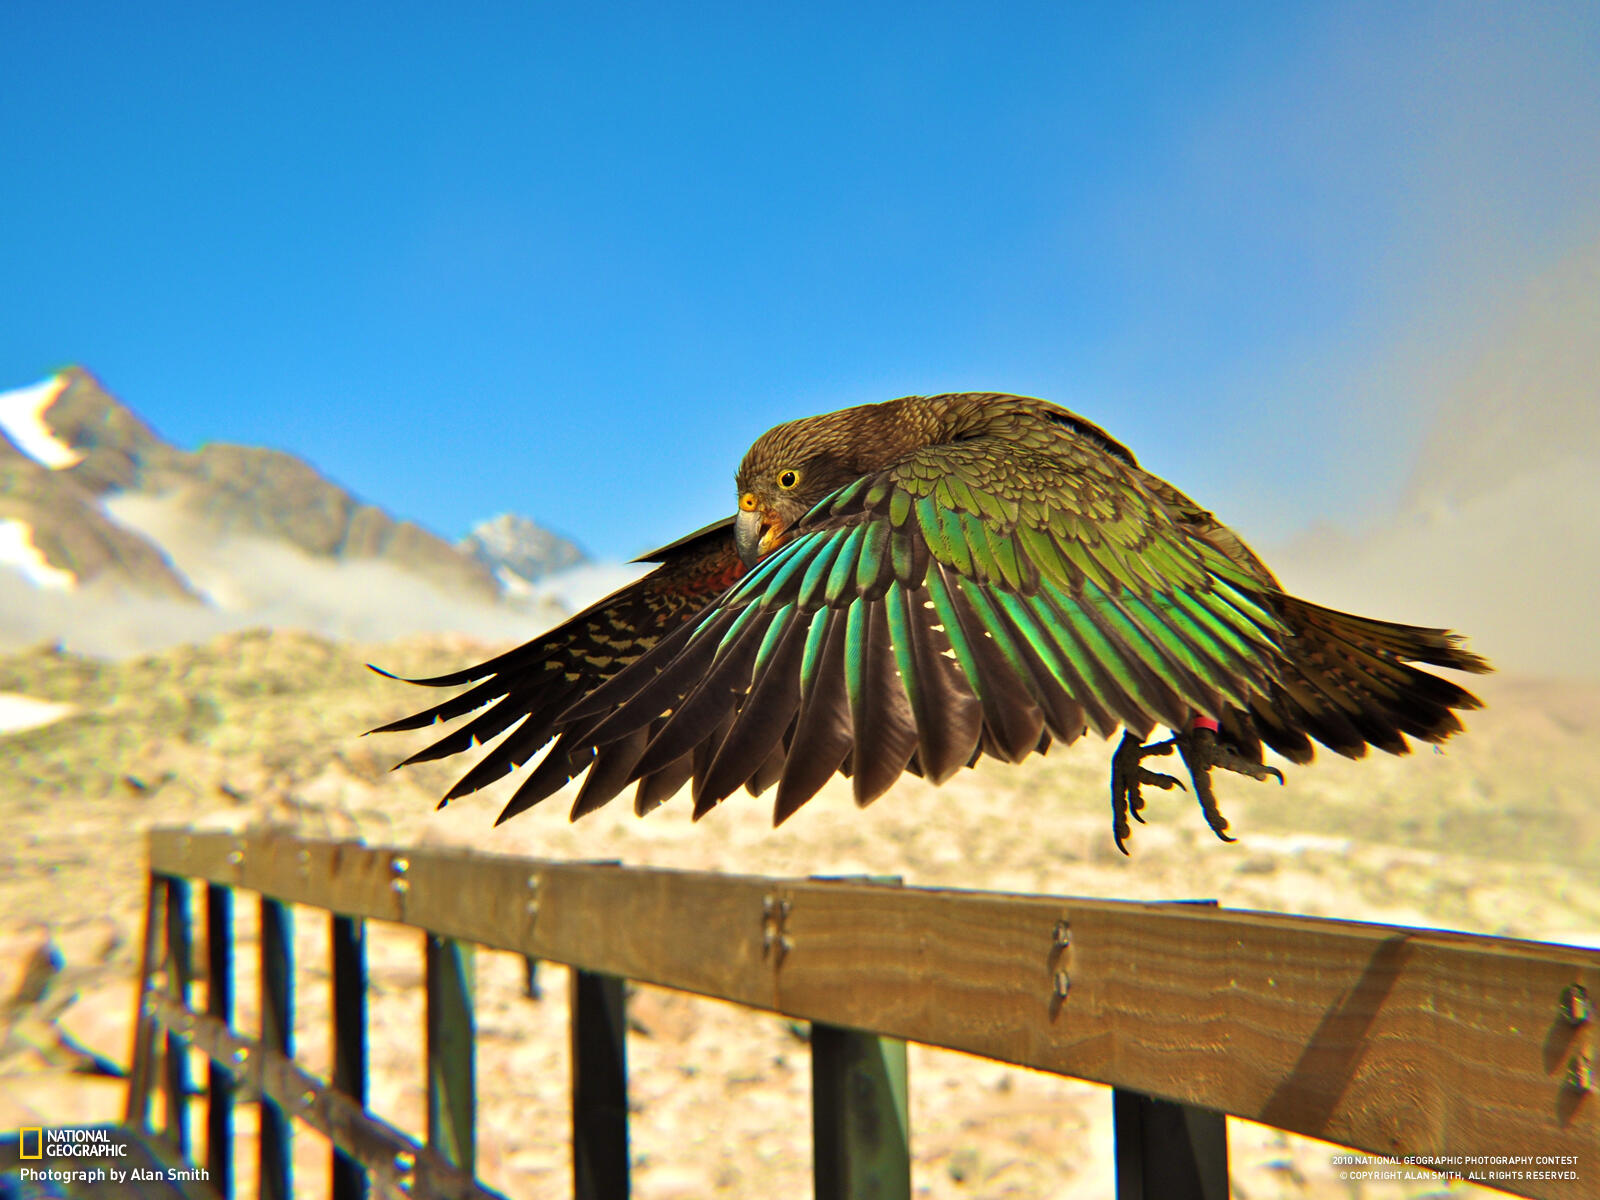 Wallpapers parrot Kea national geographic on the desktop